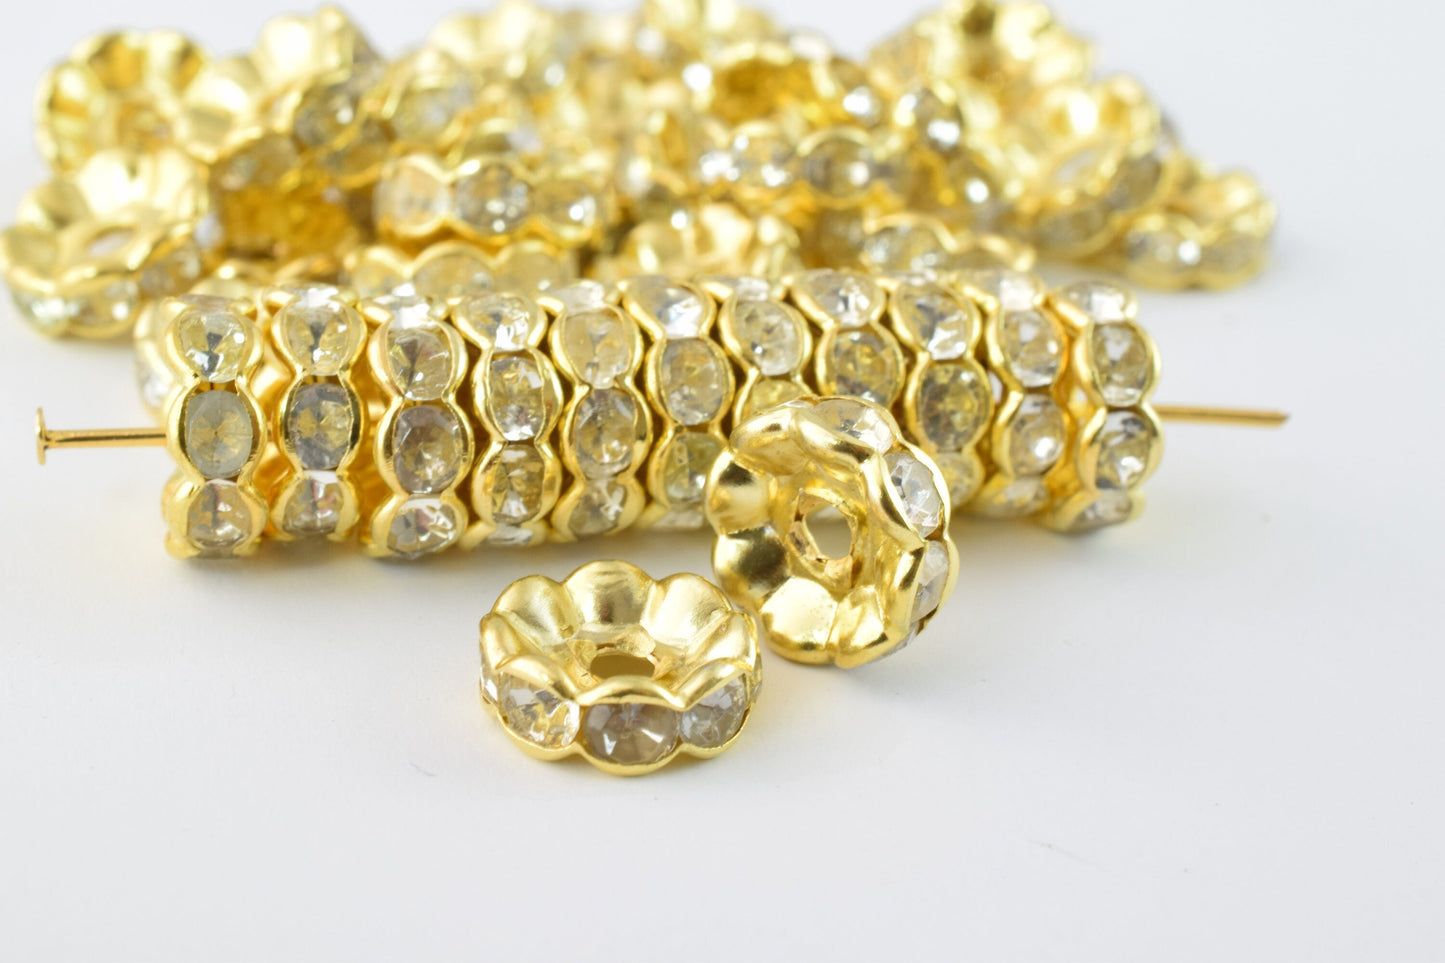 10.5mm Roundel Gold Plated Pave Beads with Clear Rhinestones,Rhinestone Spacers,Scalloped WAVY EDGE Basketball Wives